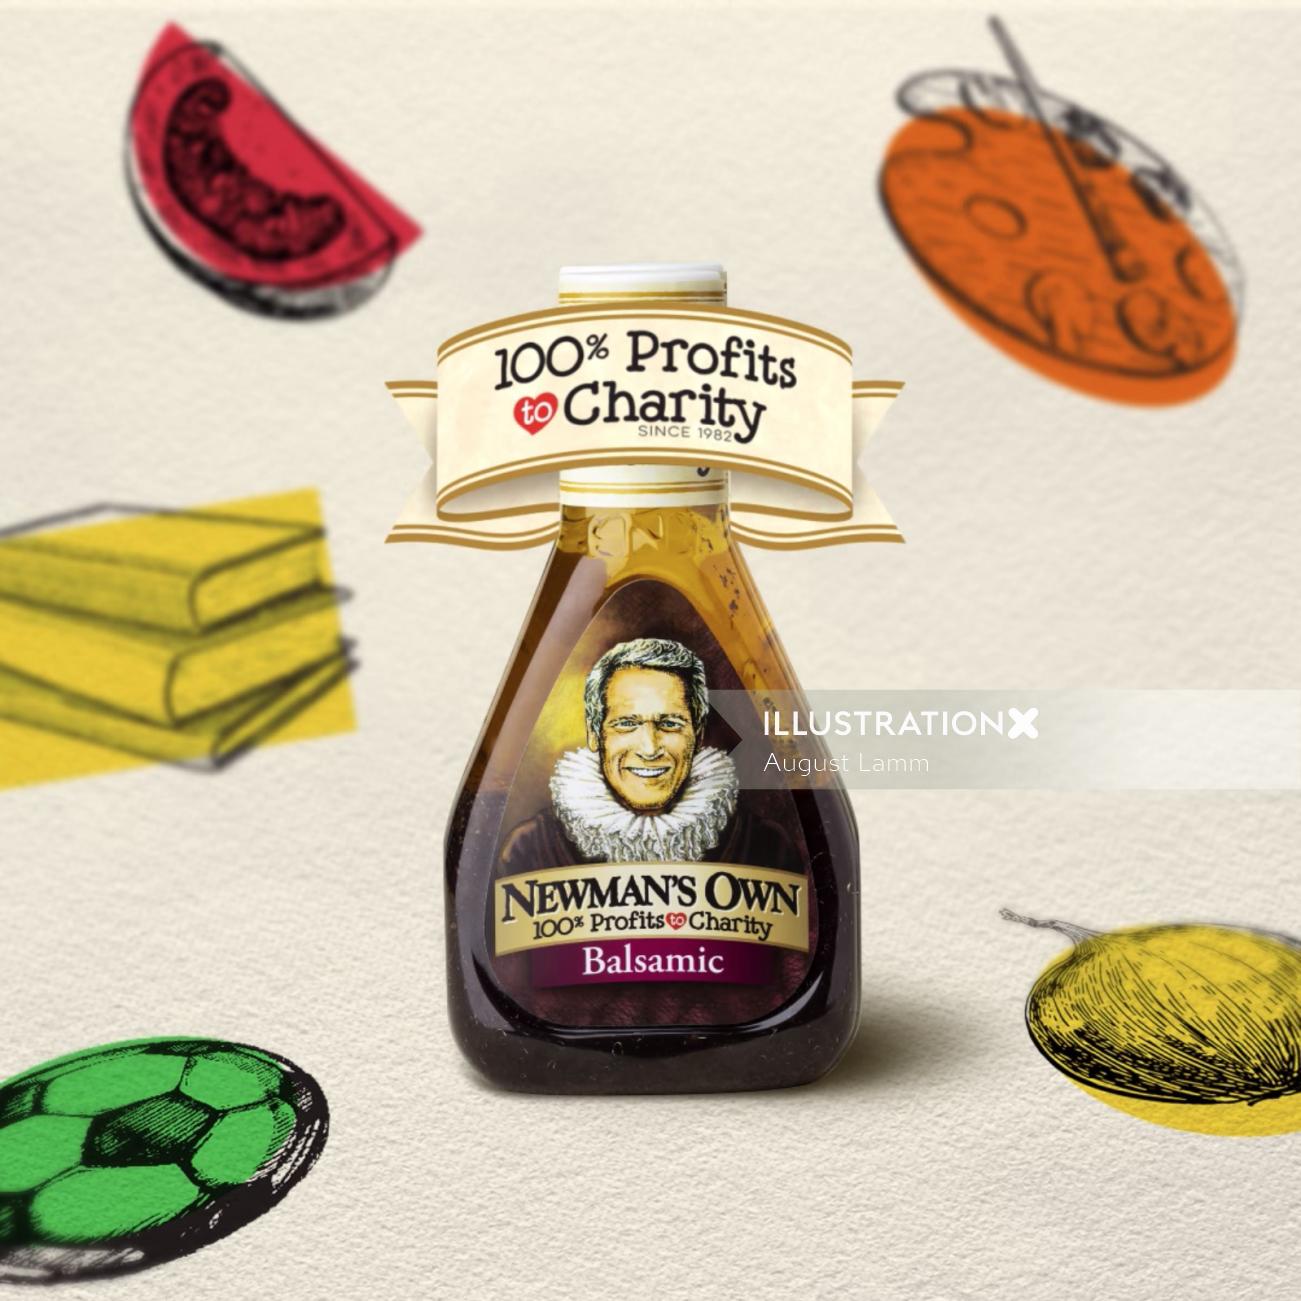 Packaging illustration of Newman's own Balsamic